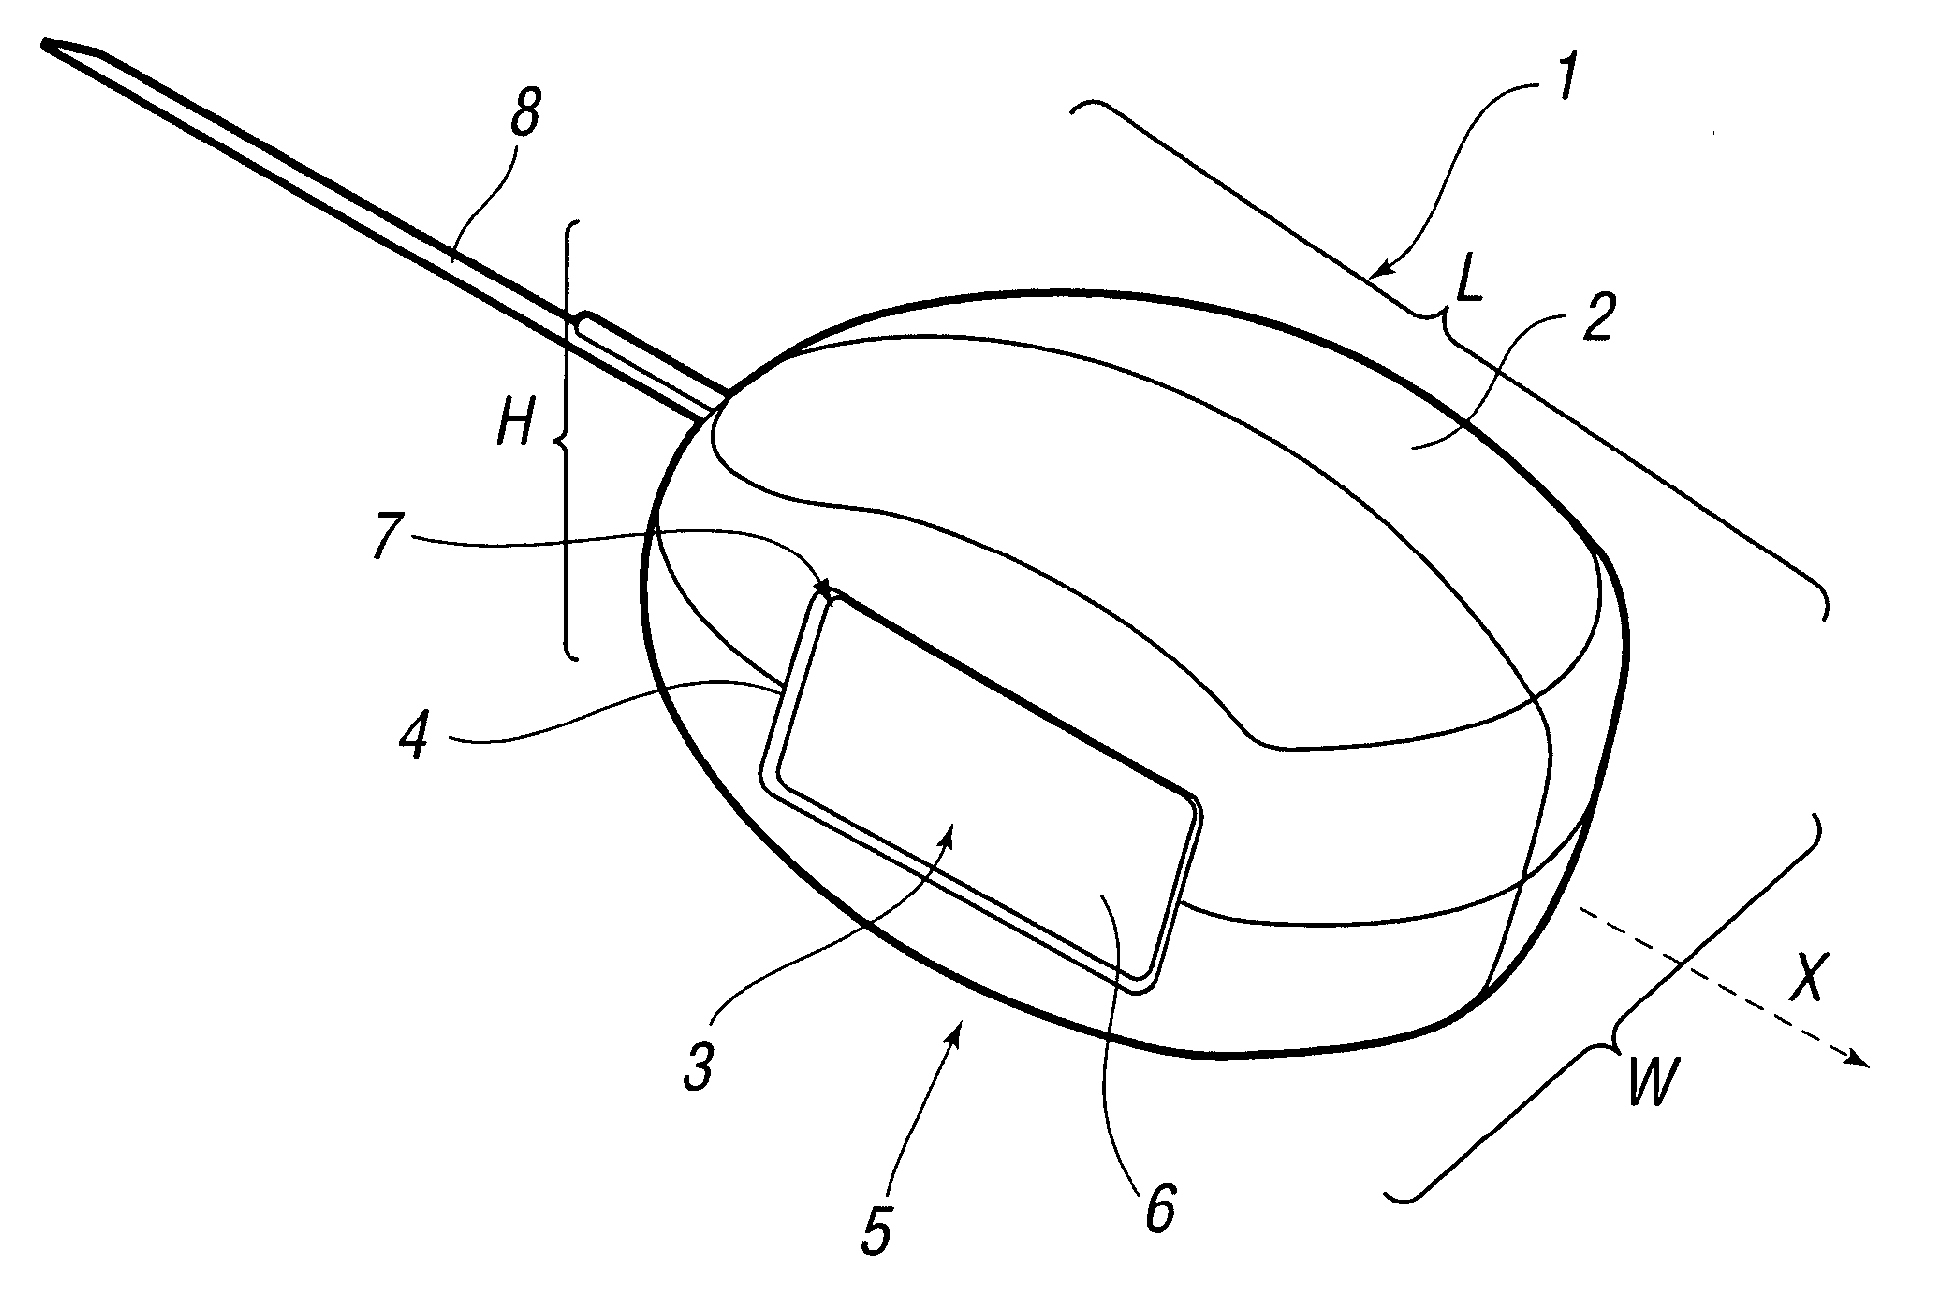 Compressible device